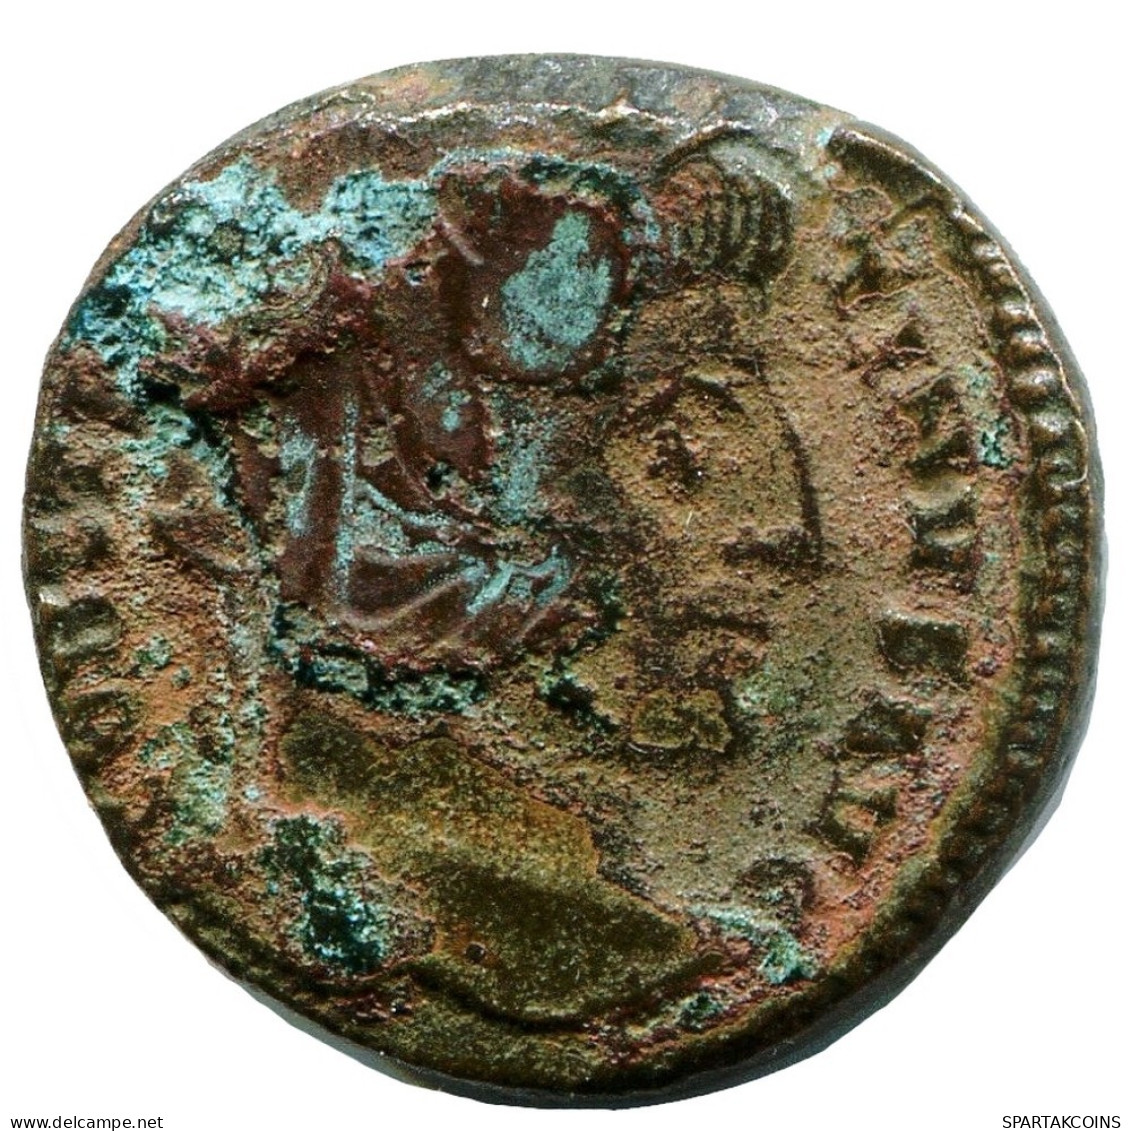 CONSTANTINE I MINTED IN ROME ITALY FOUND IN IHNASYAH HOARD EGYPT #ANC11150.14.U.A - The Christian Empire (307 AD To 363 AD)